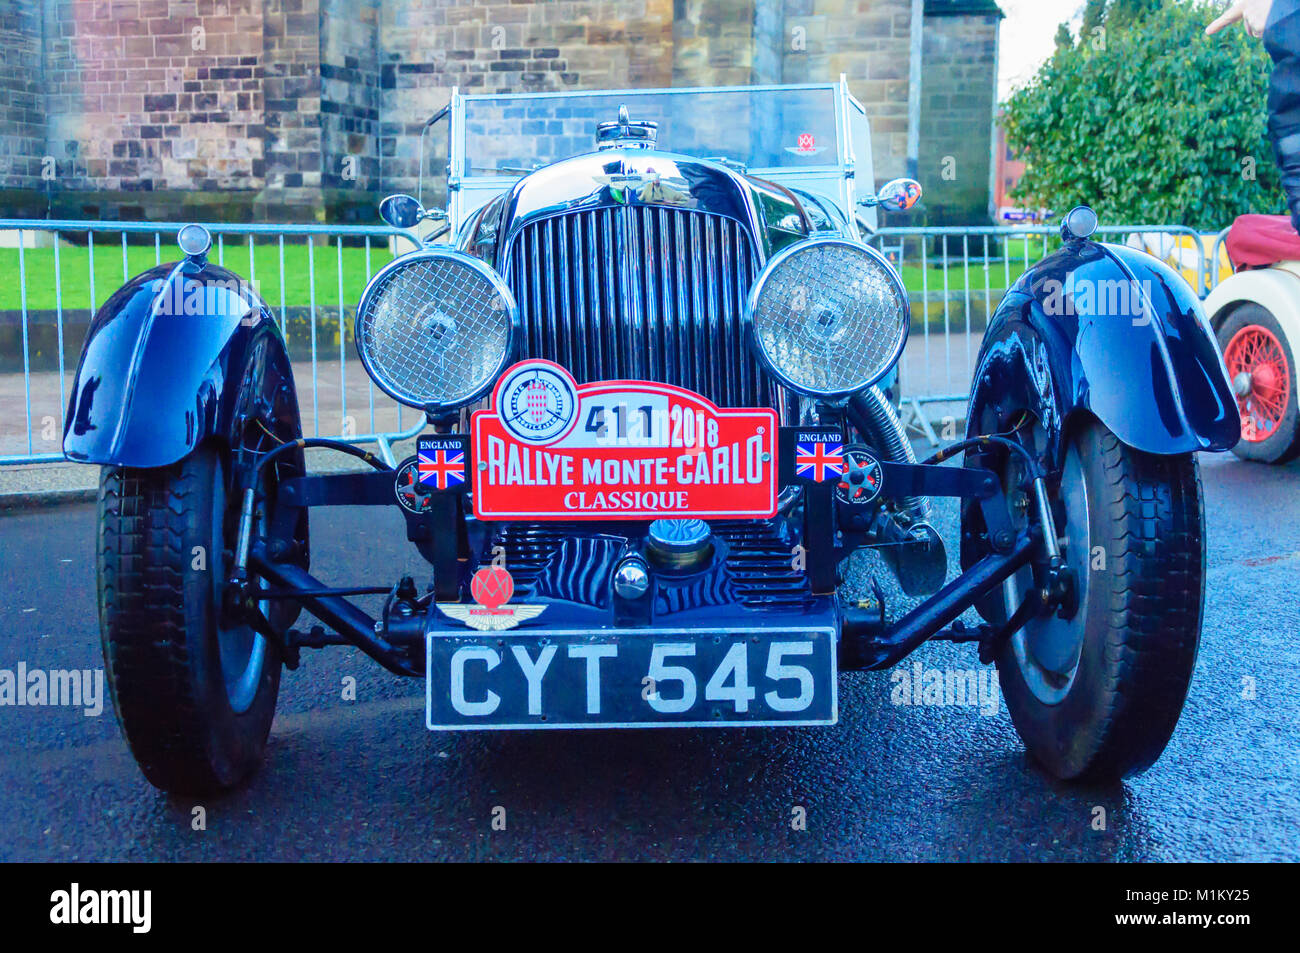 Paisley, Scotland, UK. 31st January 2018: Front view of an Aston Martin classic car. The Monte Carlo Rally starts at Paisley Abbey. This year sees the 21st  Historique event and the 3rd Classique event. Both events are staged by the Automobile Club de Monaco  and take place on open public roads. The distance to Monte Carlo is 1270 miles. Credit: Skully/Alamy Live News Stock Photo